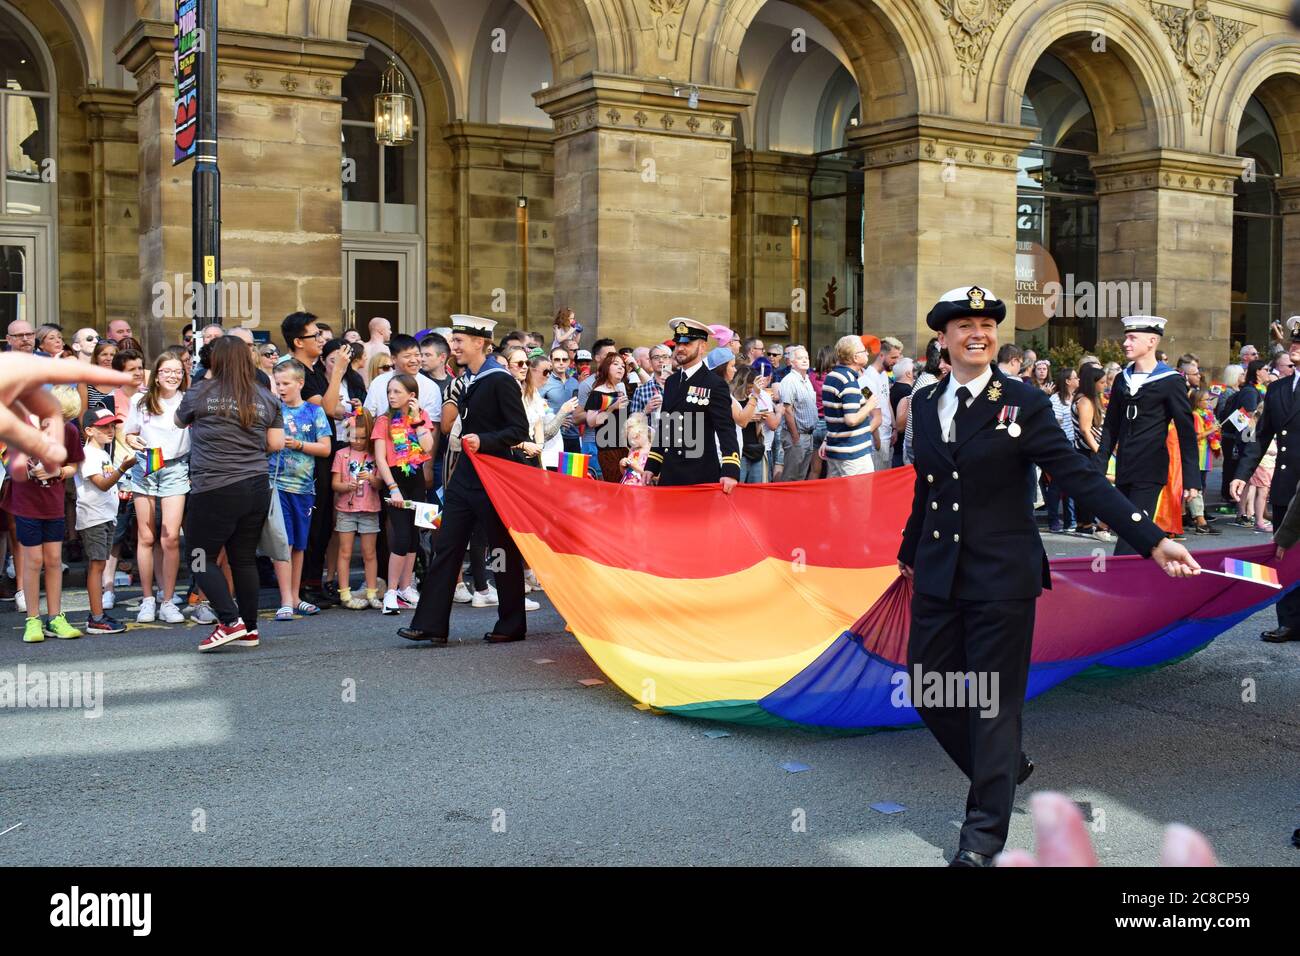 Pride parade passing in front of Radisson Hotel Manchester UK. Royal Navy in uniform carrying giant rainbow pride flag smiling with crowd. Stock Photo